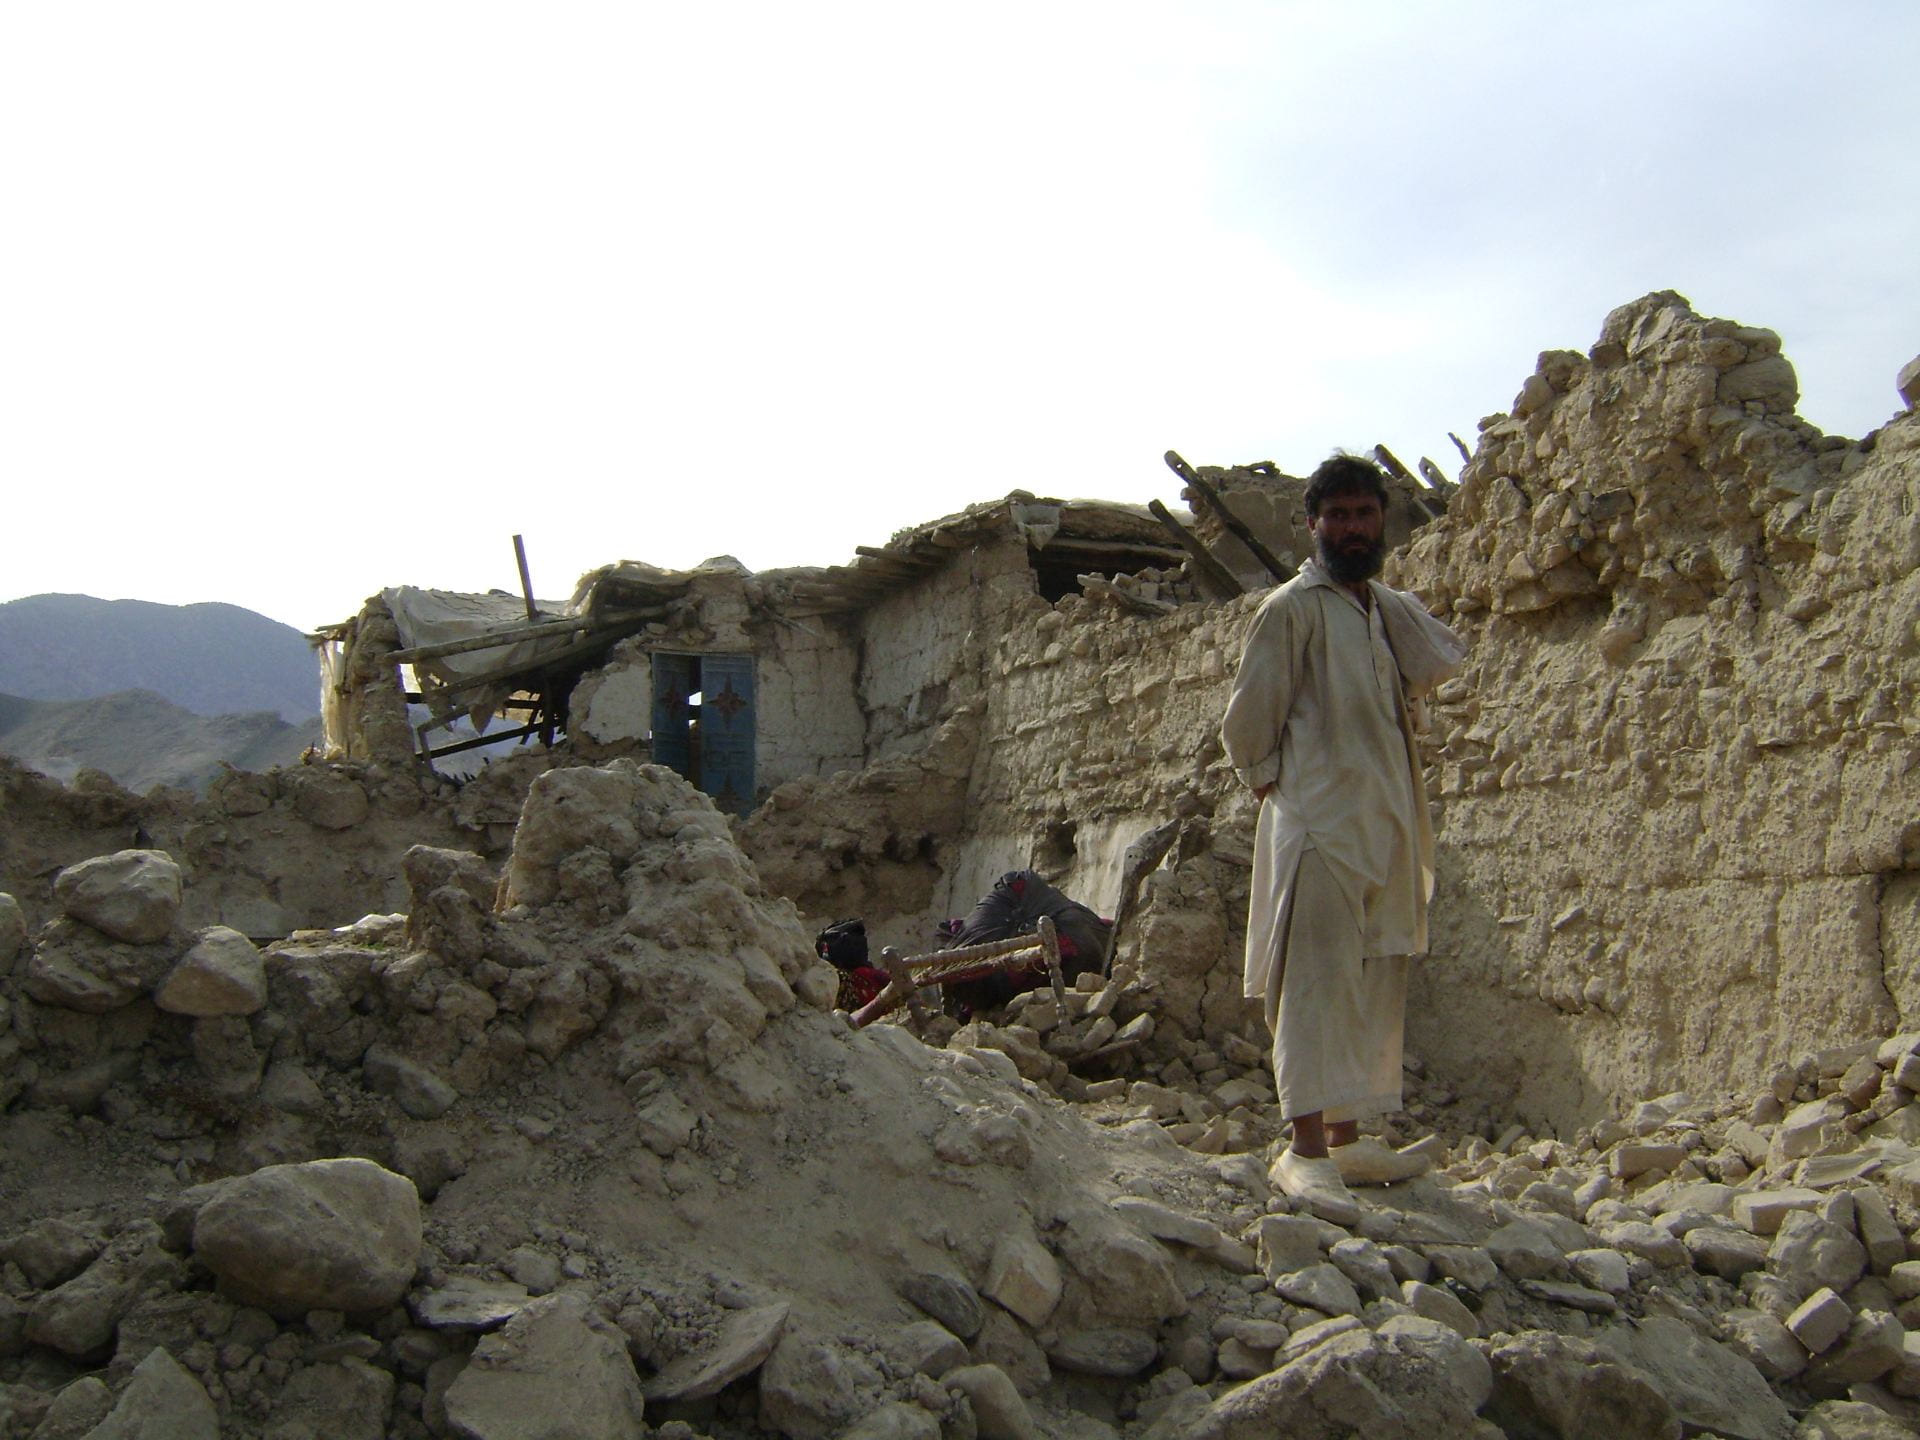 Image 1. Afghan Man standing in the rumble caused by an earthquake. Source: Flickr